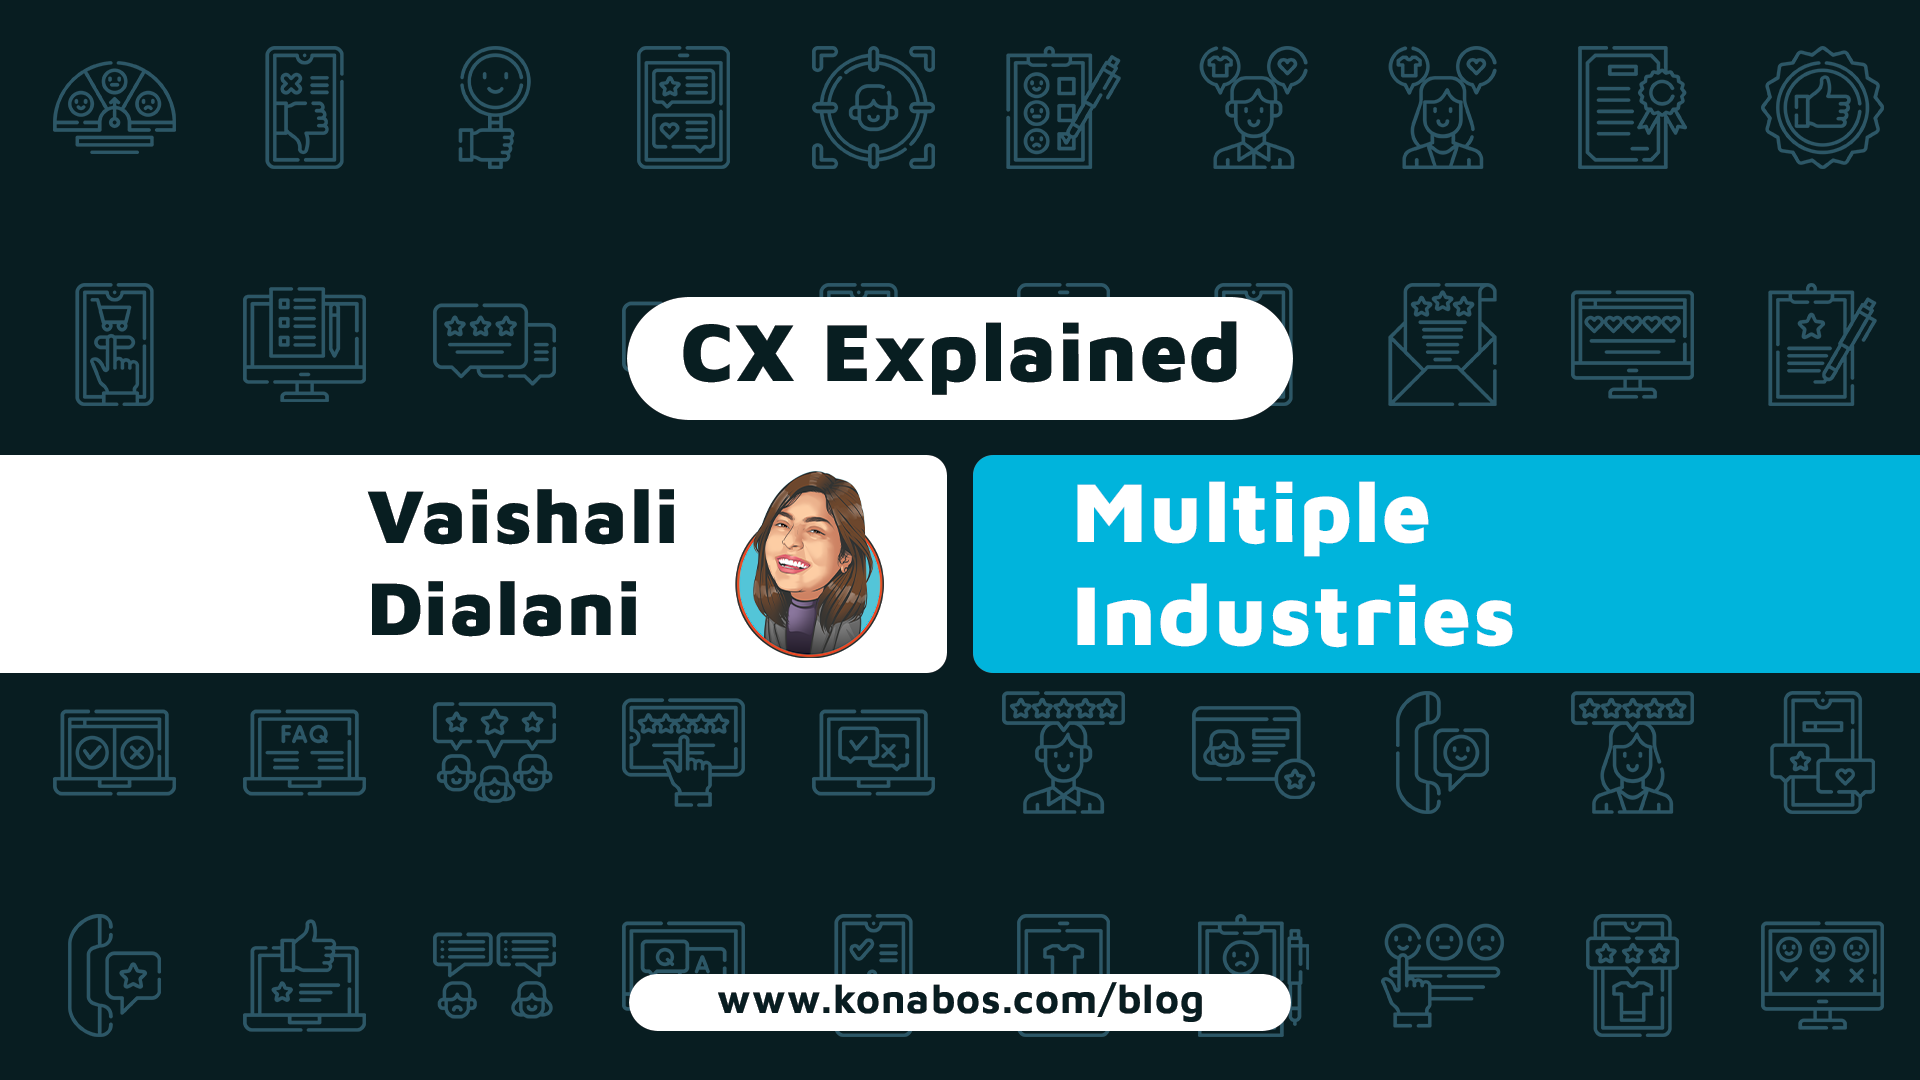 Animated image of Vaishali Dialani, our Customer Experience (CX) expert, alongside the blog title, 'Navigating the Unfamiliar Waters of CX in New Industries'. The image represents Vaishali with the visual elements typically associated with her brand, ensuring an engaging visual introduction to the blog. The series name, 'CX Explained', is also prominently displayed, indicating that the blog is a part of this insightful and informative series aimed at explaining various aspects and nuances of Customer Experience.